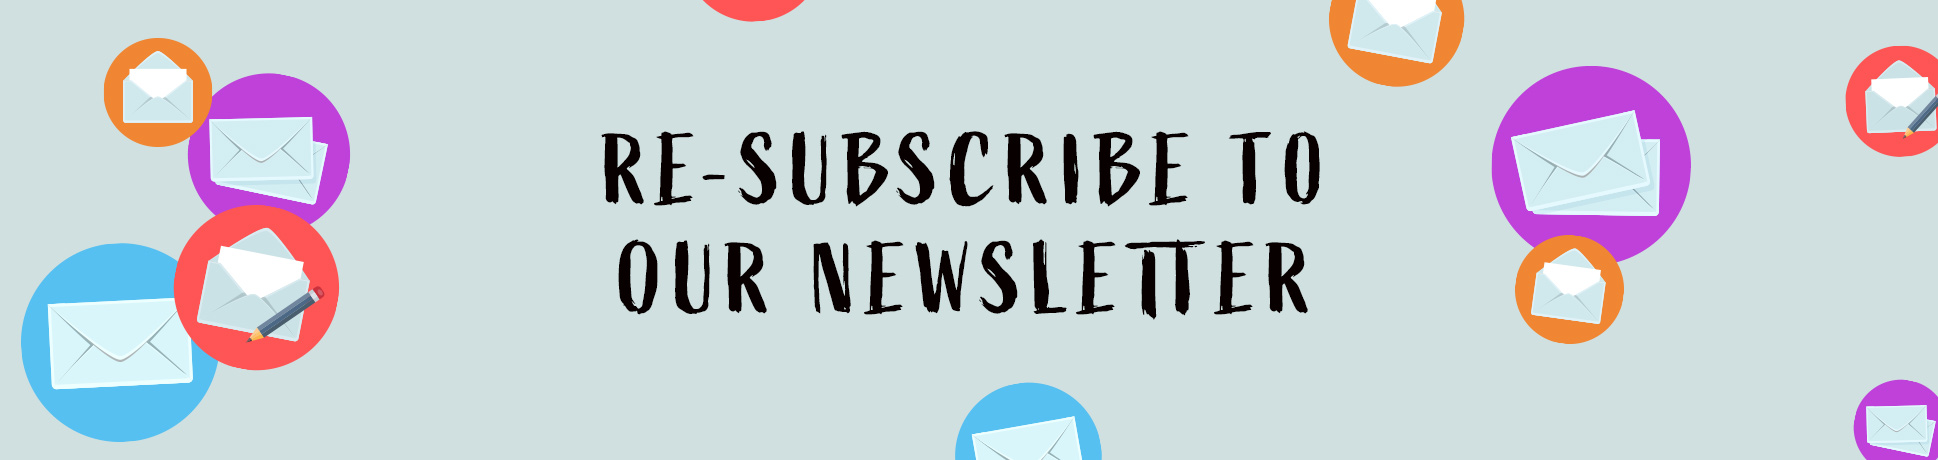 Resubscribe to our newsletter